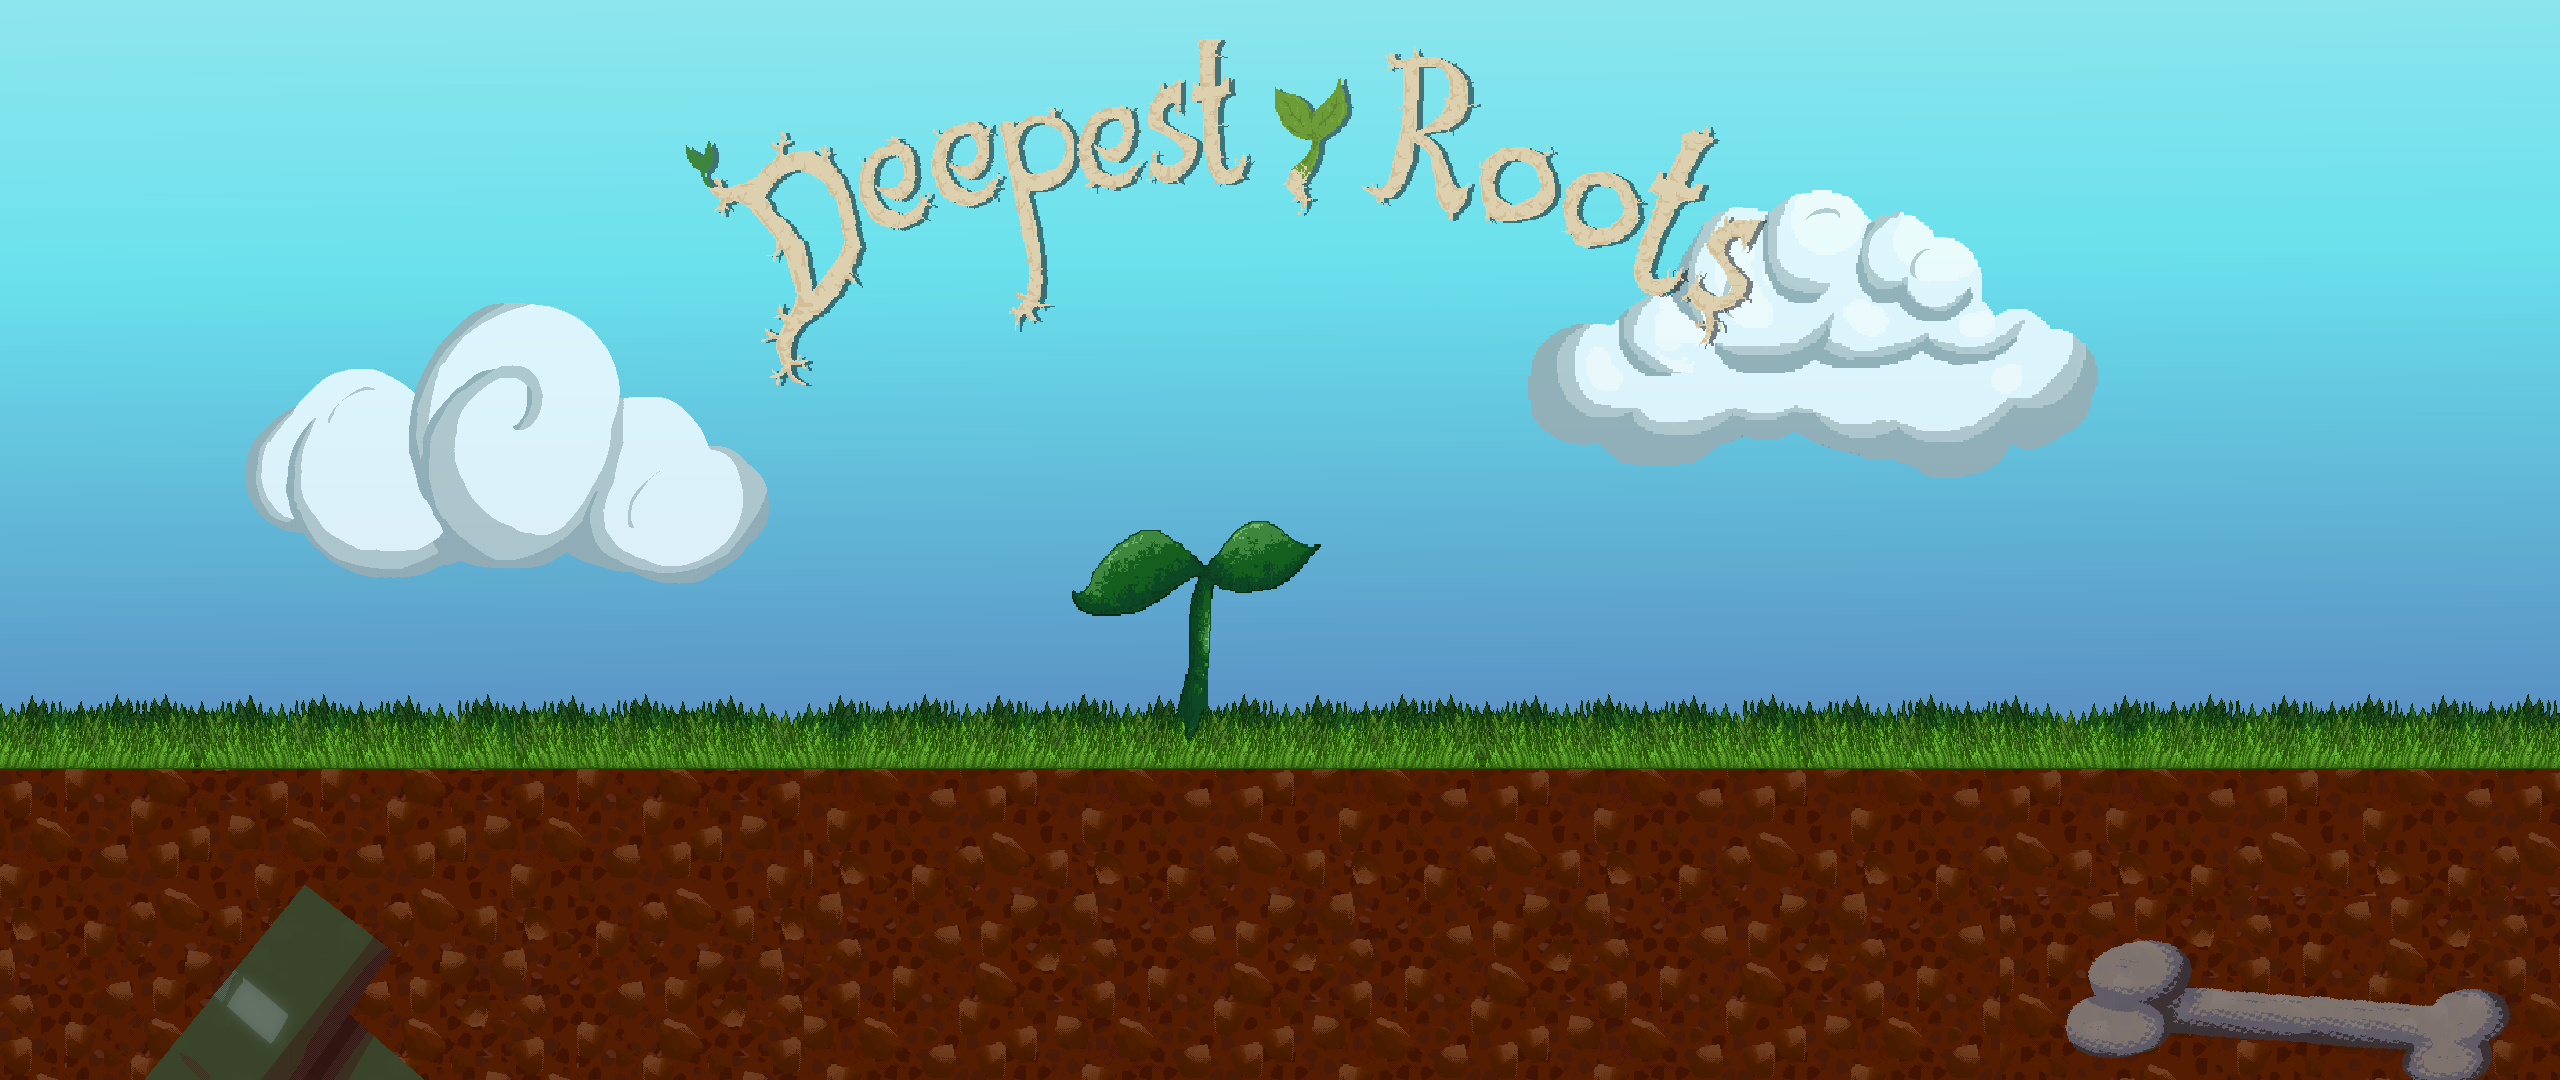 Deepest Roots